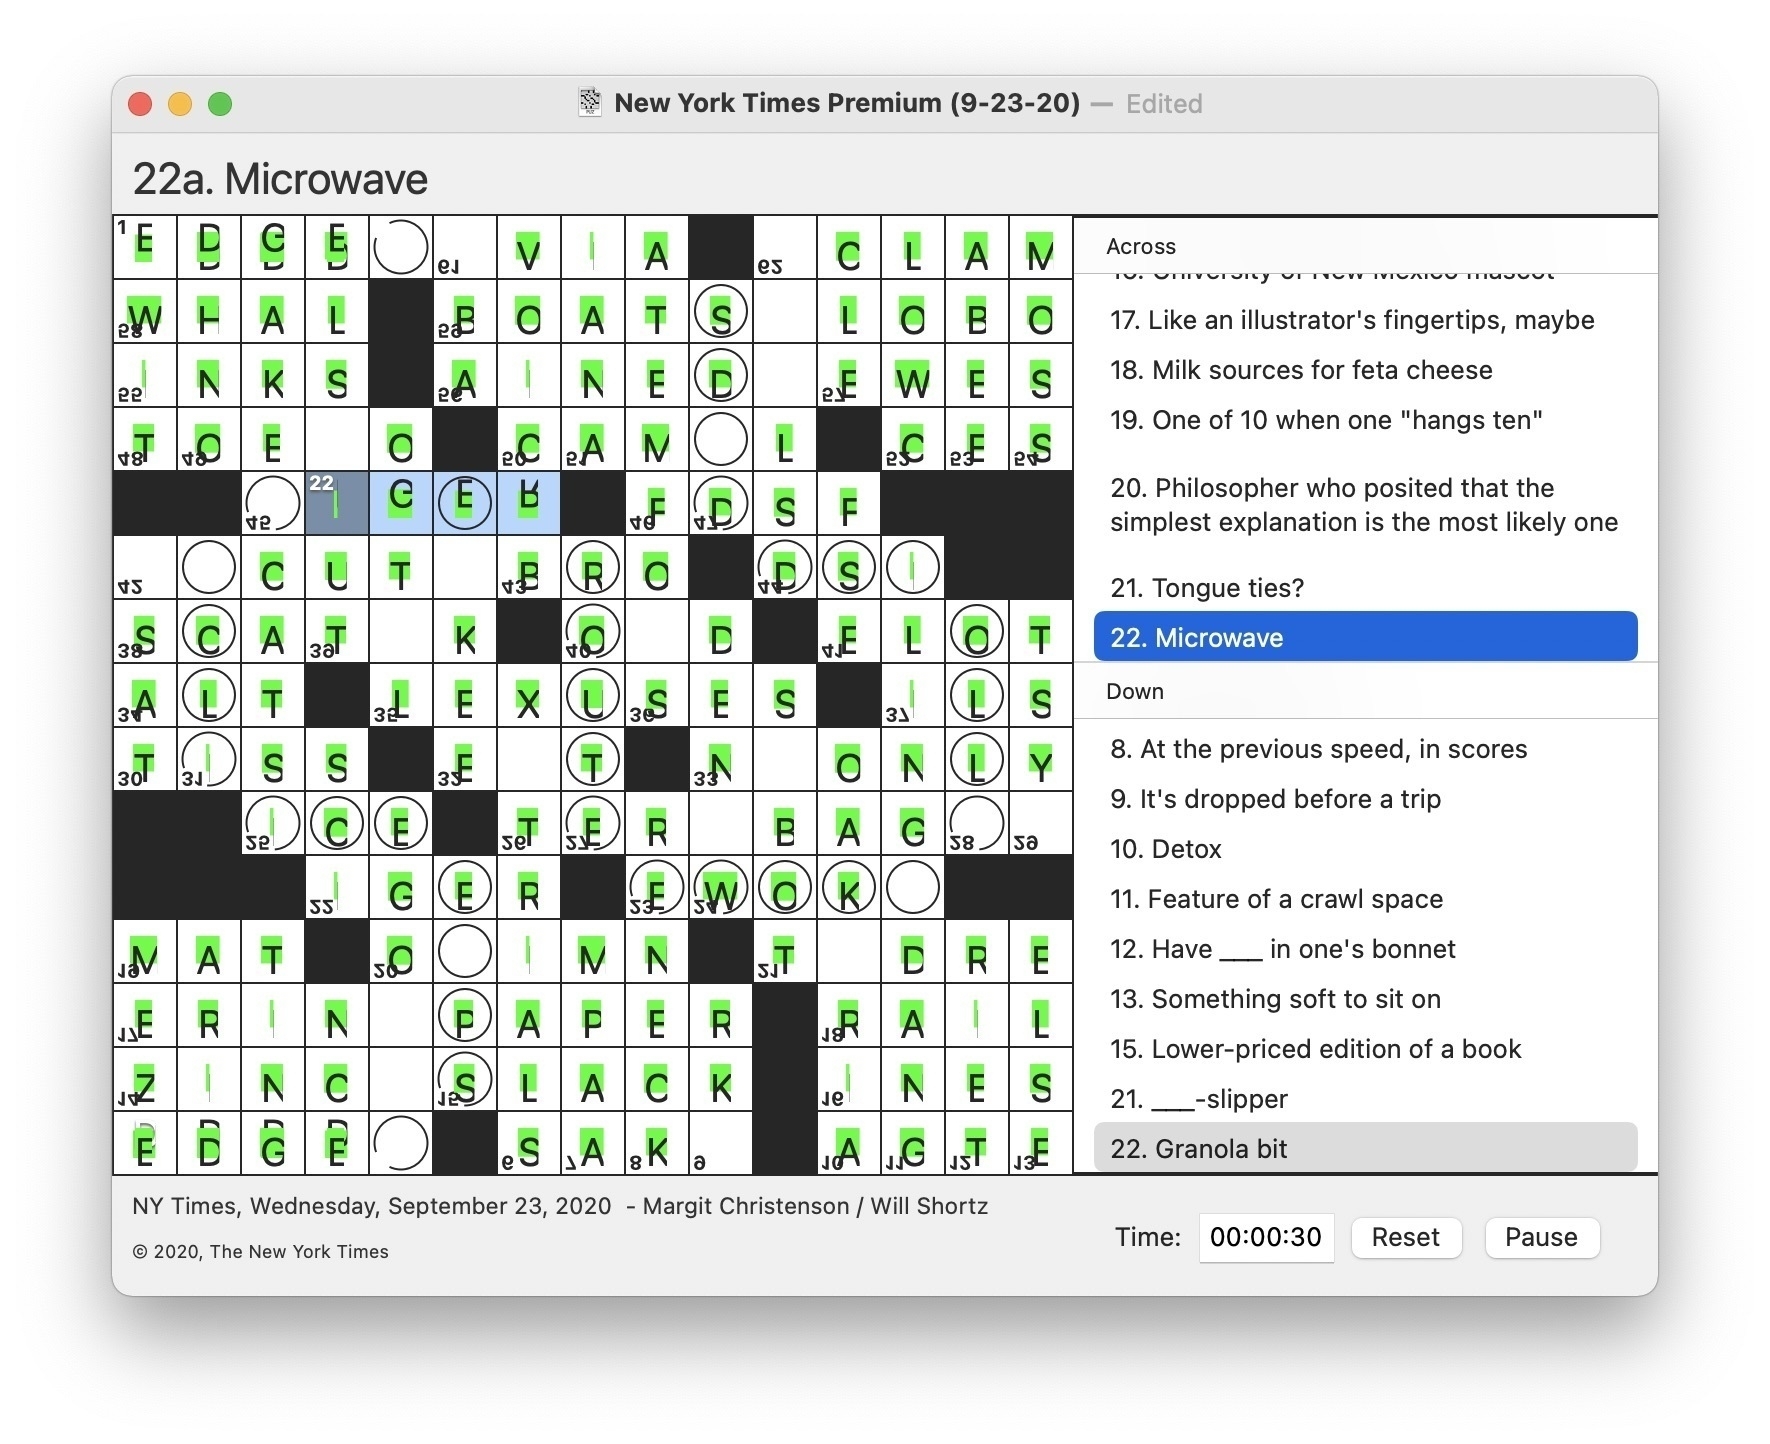 Screenshot of Black Ink with garish green highlights, clipped text, and upside-down clue numbers.